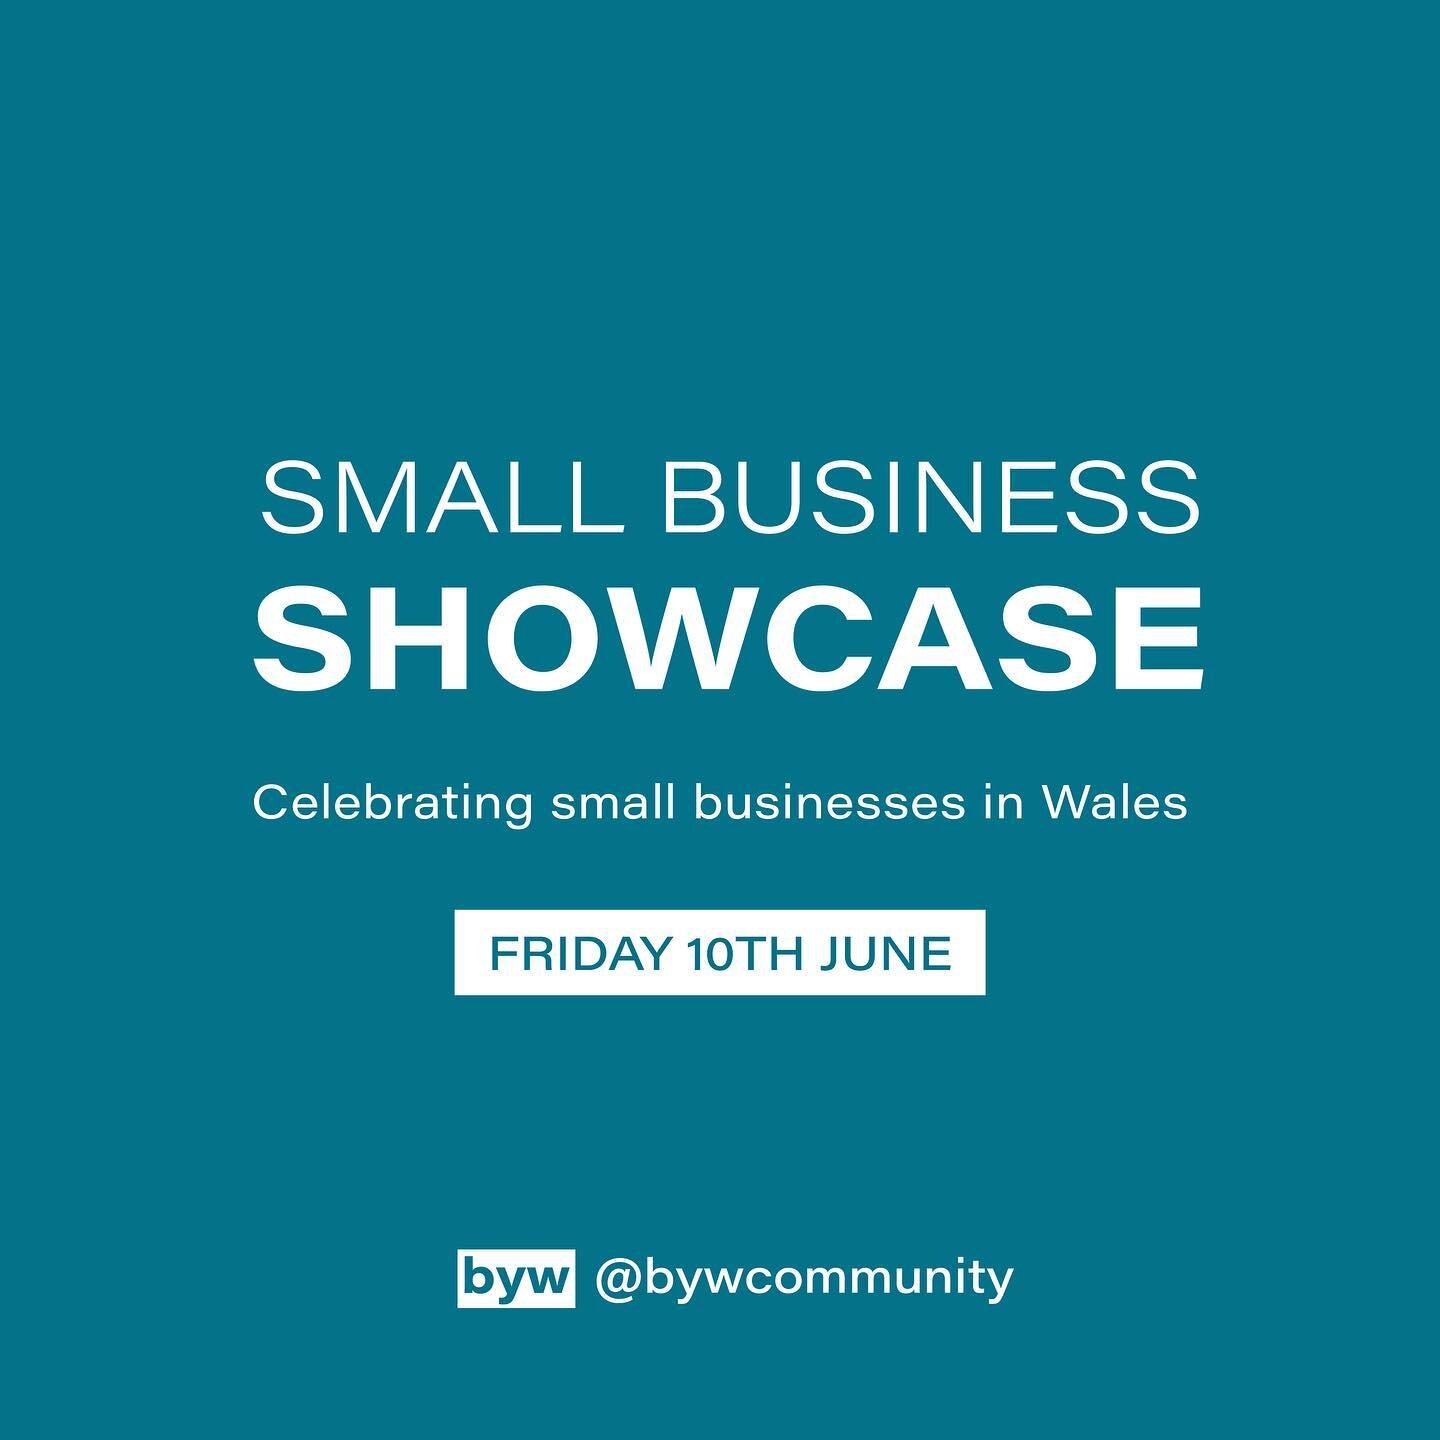 ✨ JUNE SMALL BUSINESS SHOWCASE- Would you like to join us? 

🗓 Our next Small Business Showcase is taking place in a few weeks on Friday 6th June. We had such an amazing response from the last one, we're incredibly excited to discover and celebrate 